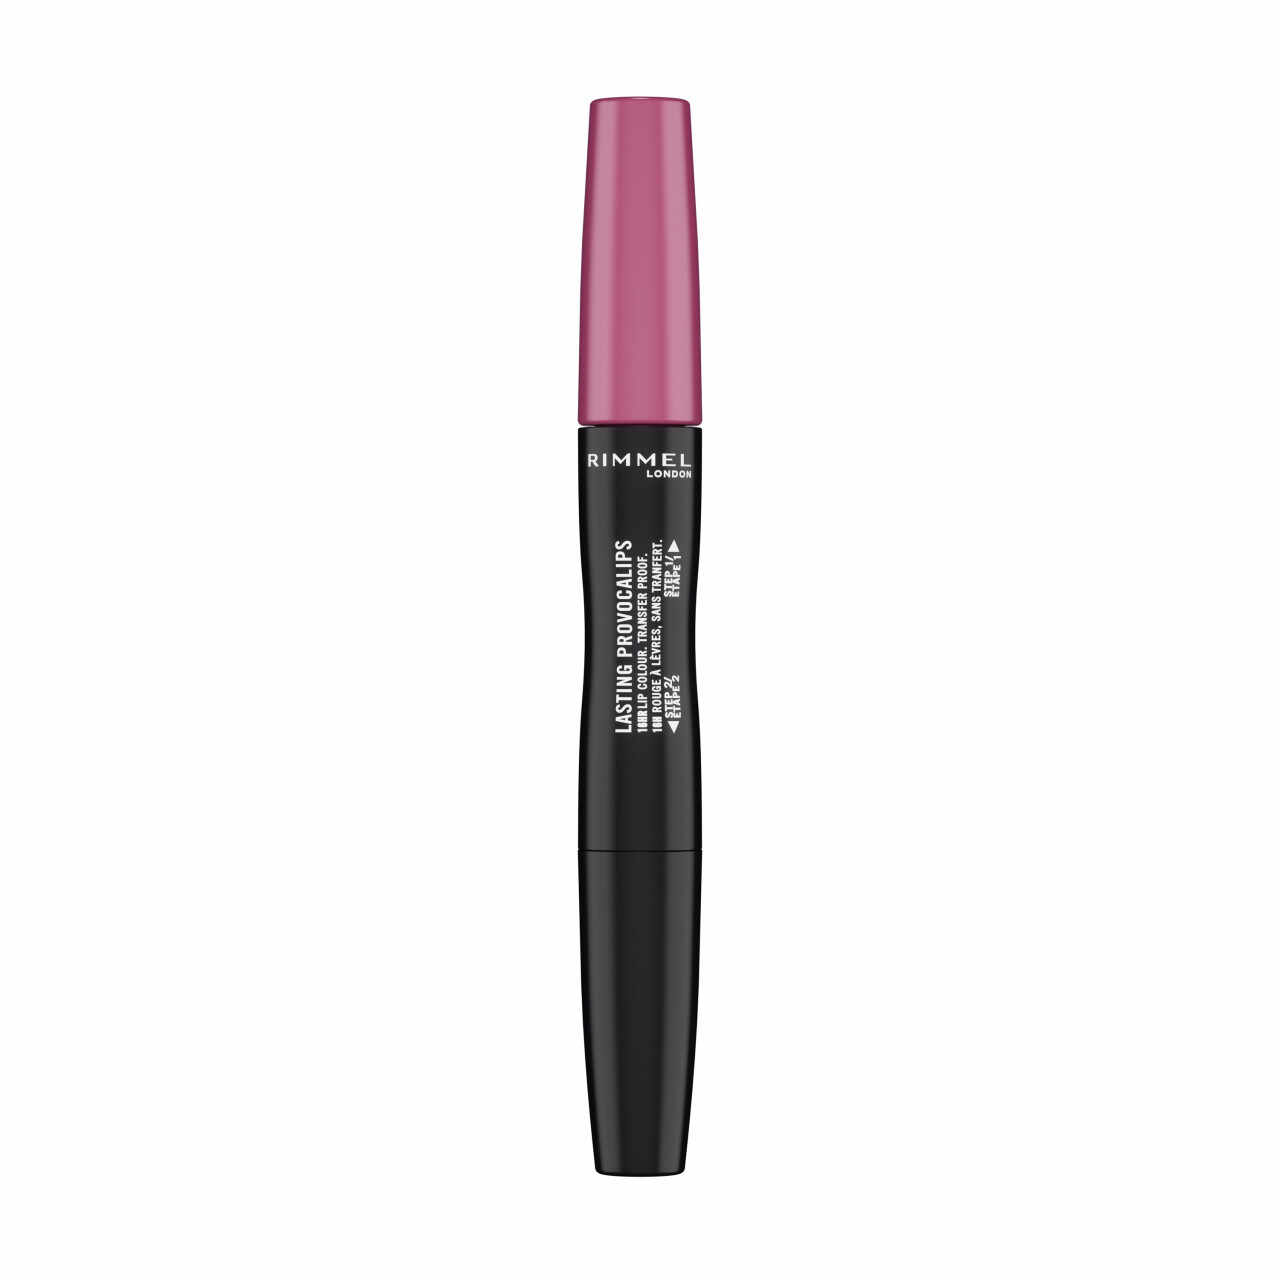 RUJ CU PERSISTENTA INDELUNGATA LASTING PROVOCALIPS DOUBLE ENDED RIMMEL LONDON PINKY PROMISE 410